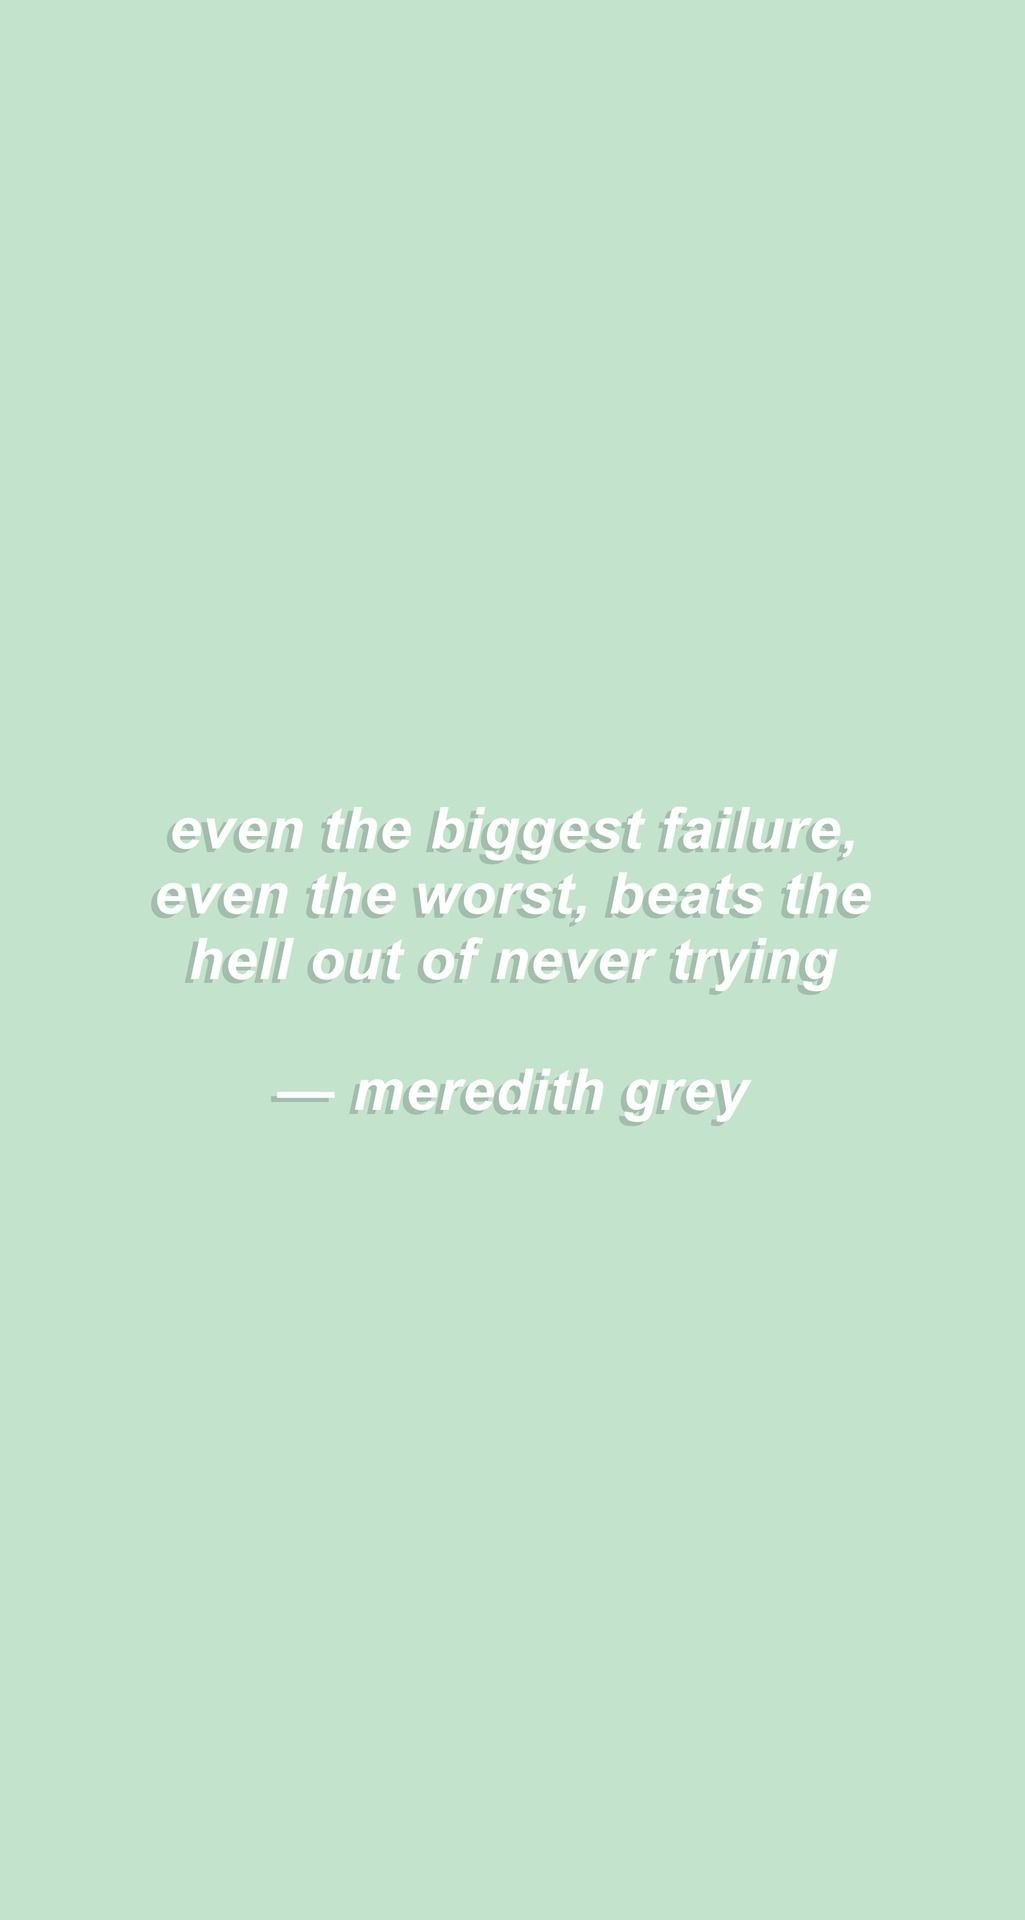 Even the biggest failure, even the worst, beats the hell out of never trying. - Meredith Grey - Grey's Anatomy